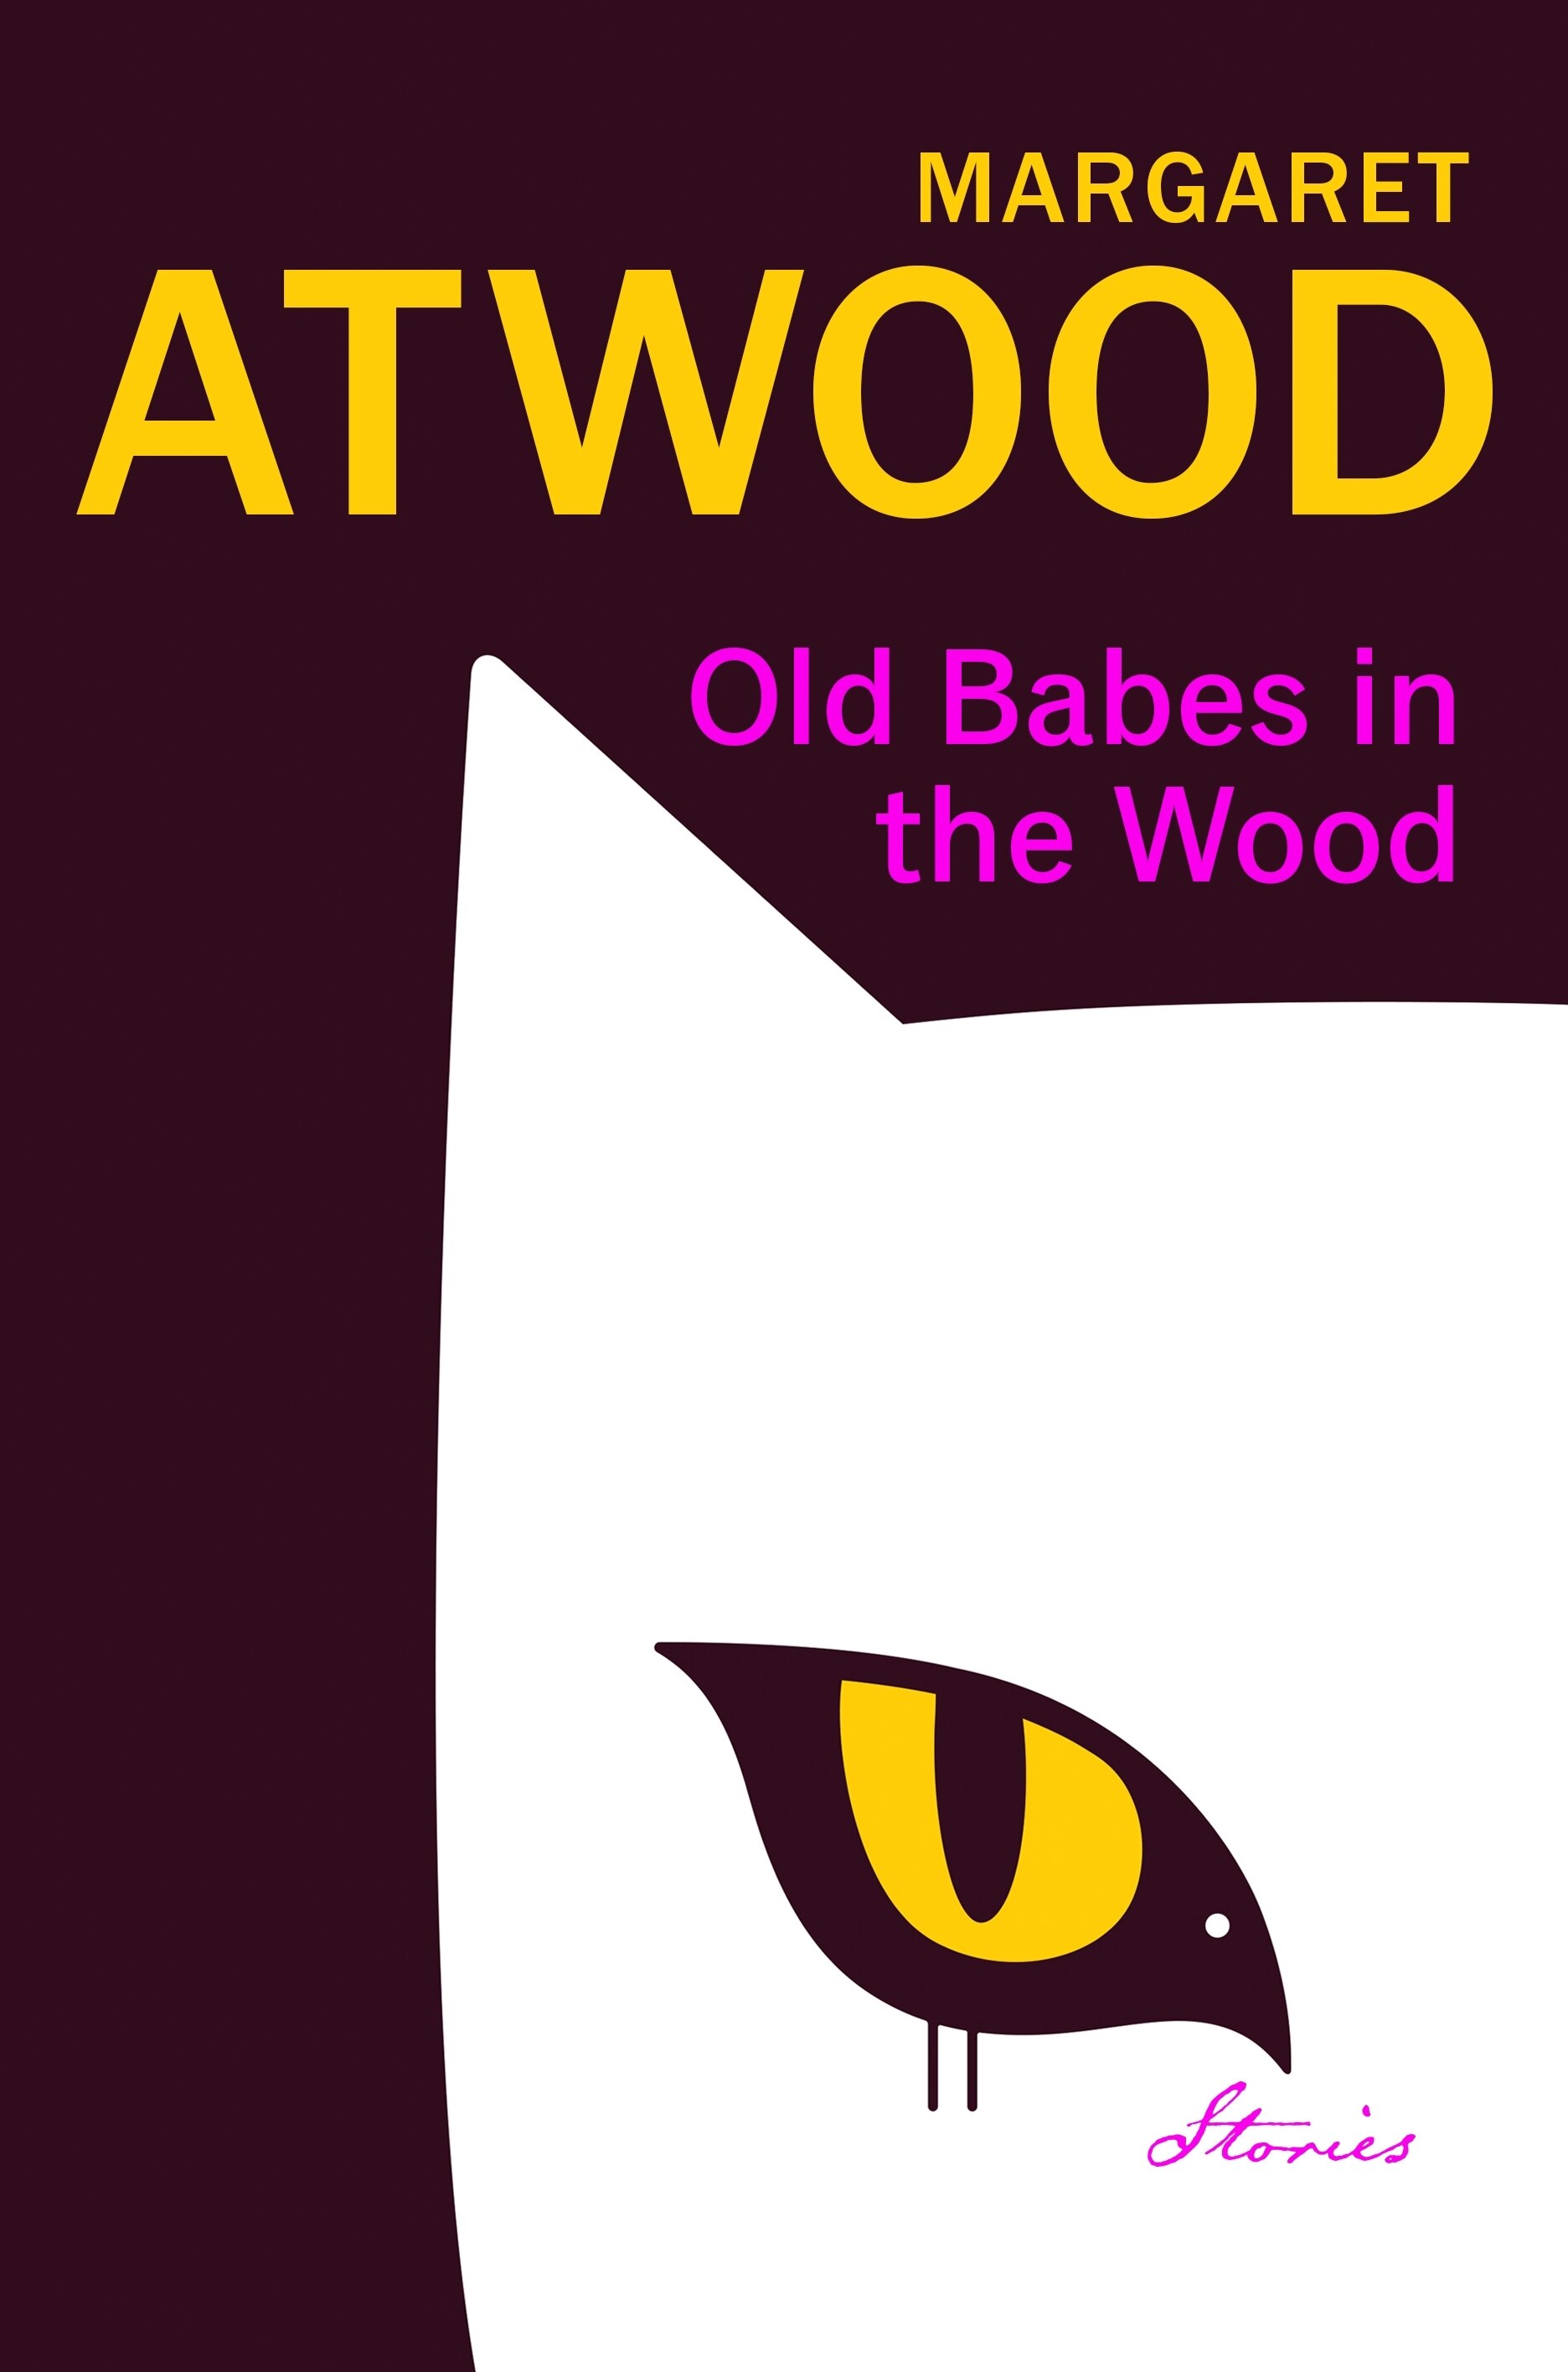 A book cover showing an illustration of a white cat's head with a bird-shaped eye against a black background